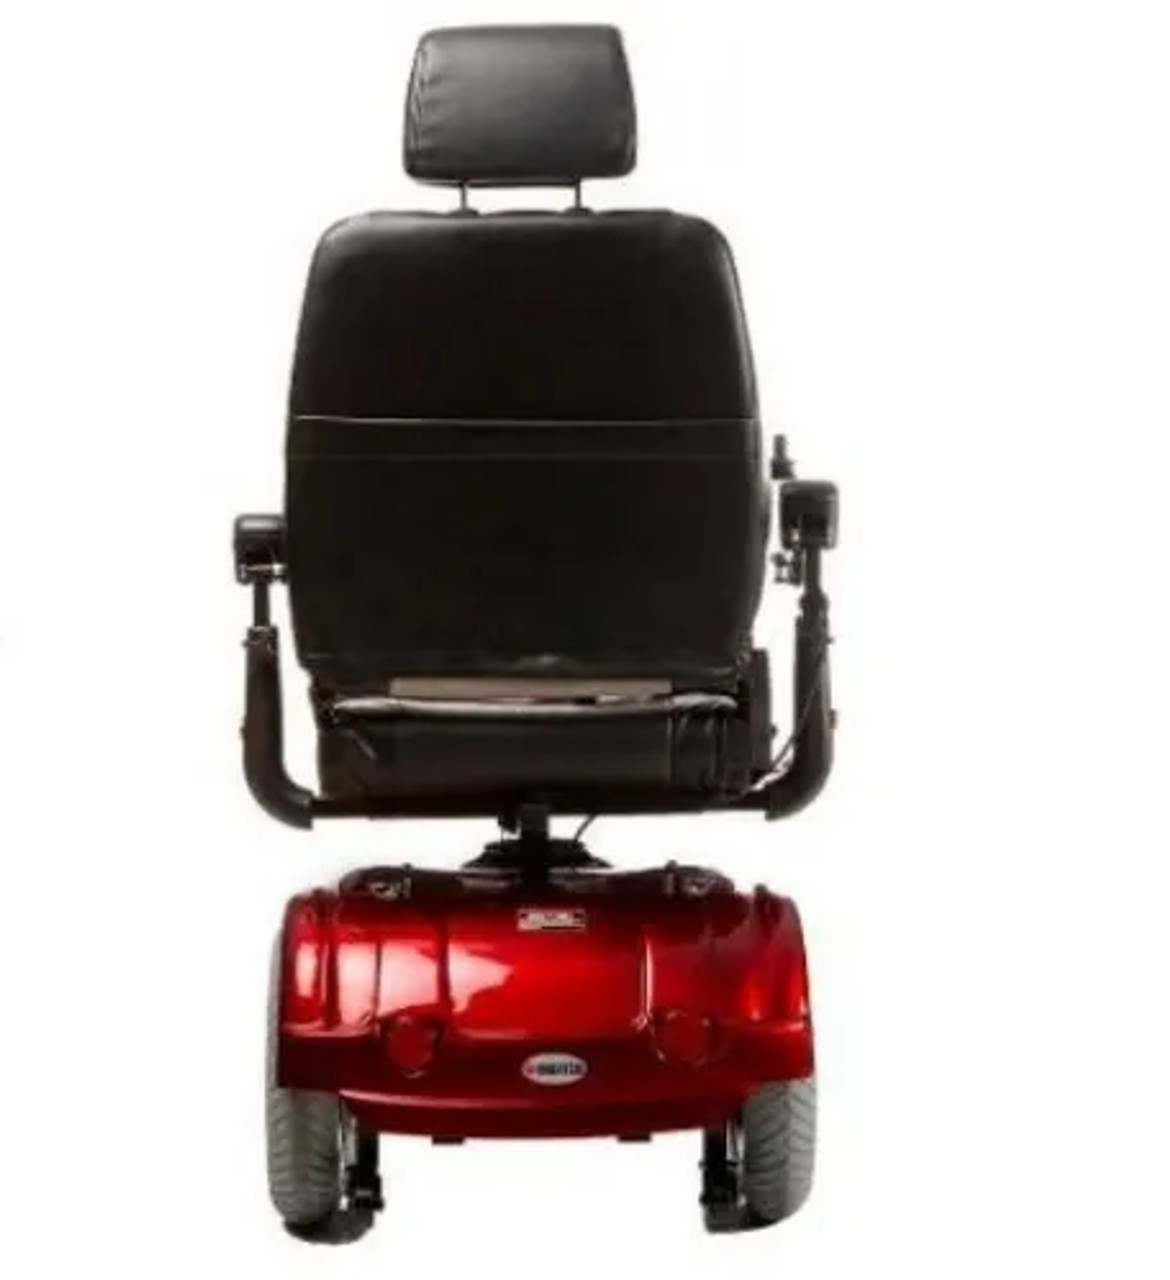 Merits Gemini Power Wheelchair with Captain Seat - Comfortable, Swiveling-Chicken Pieces